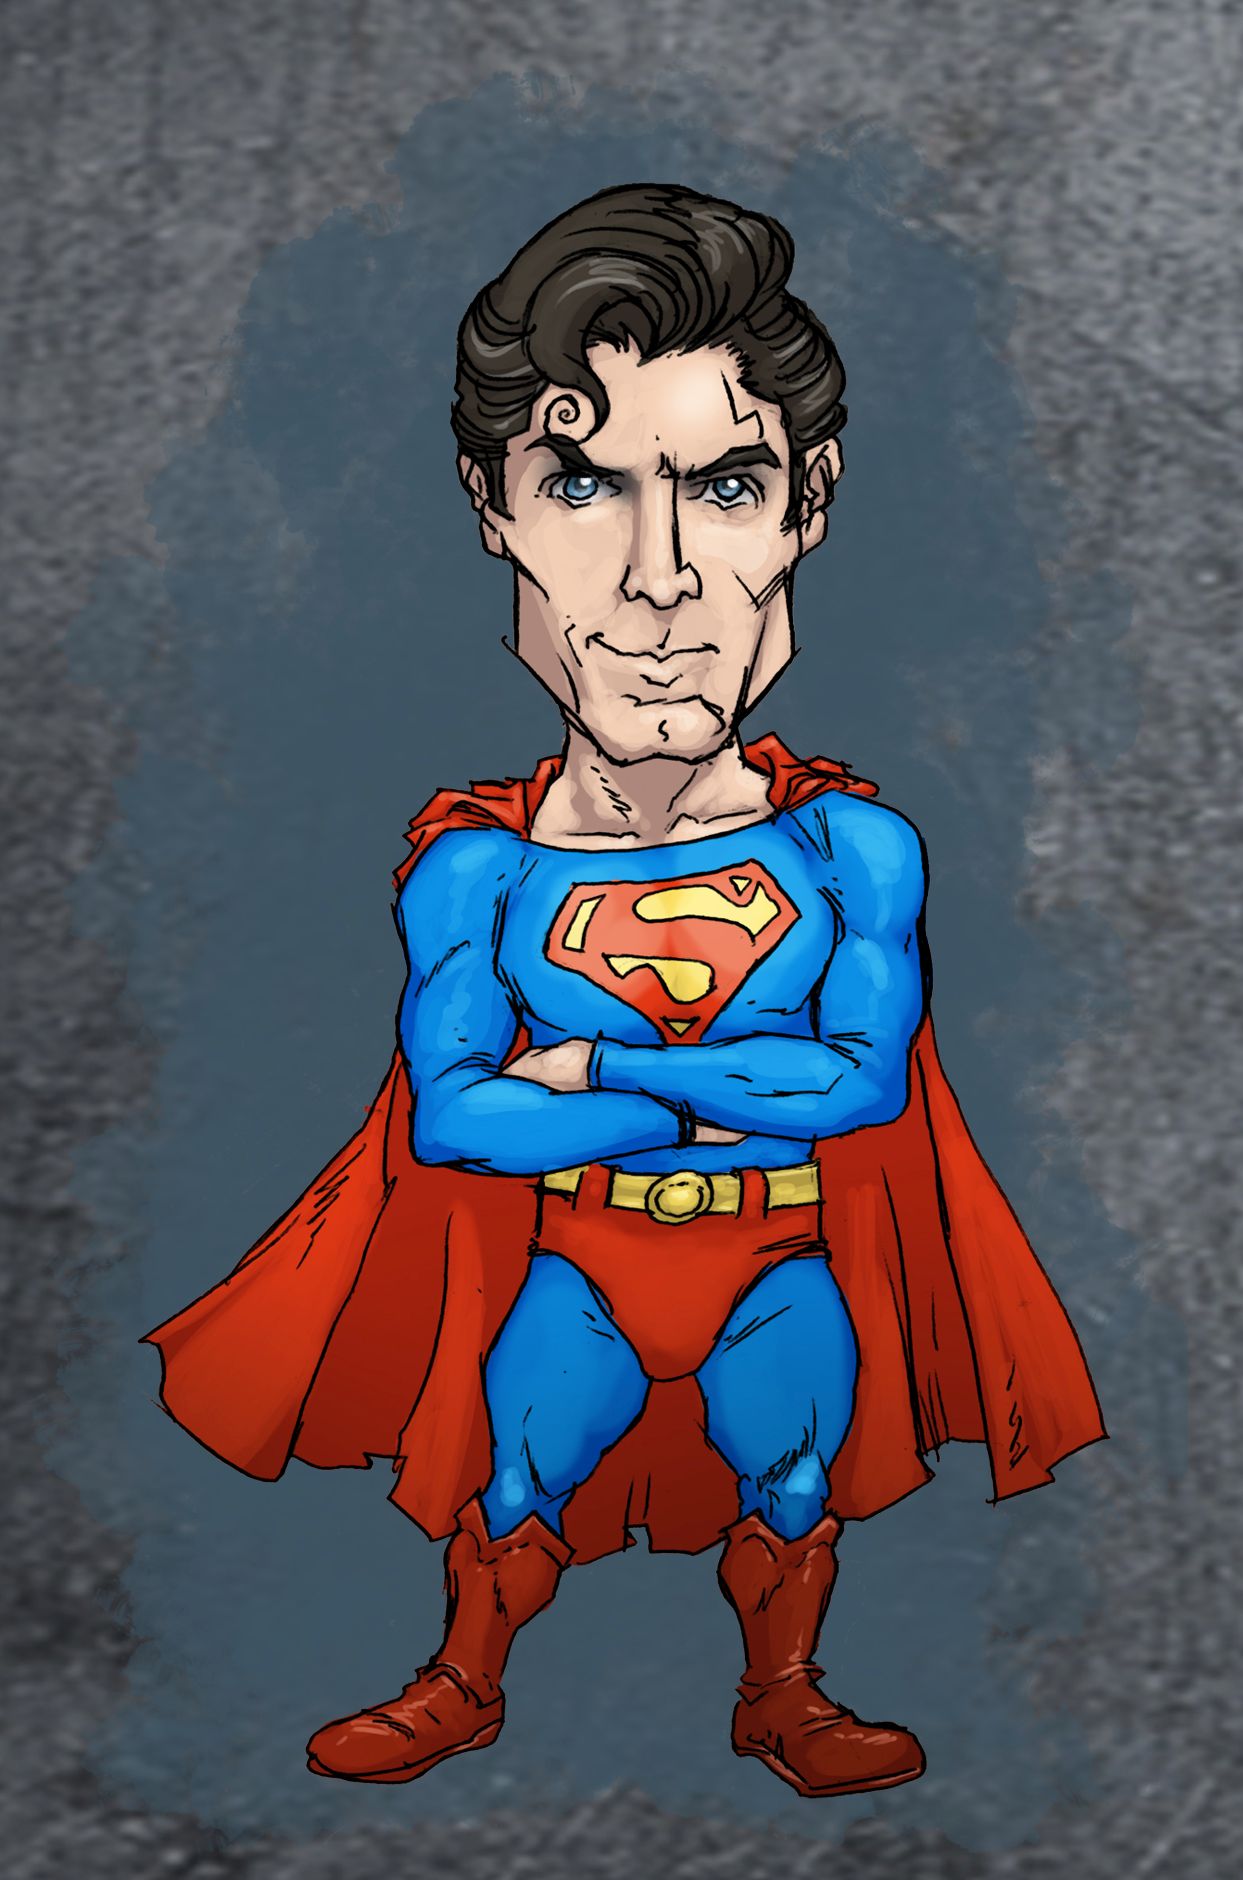 Happy birthday to Christopher Reeve all the wayto the Great Beyond 